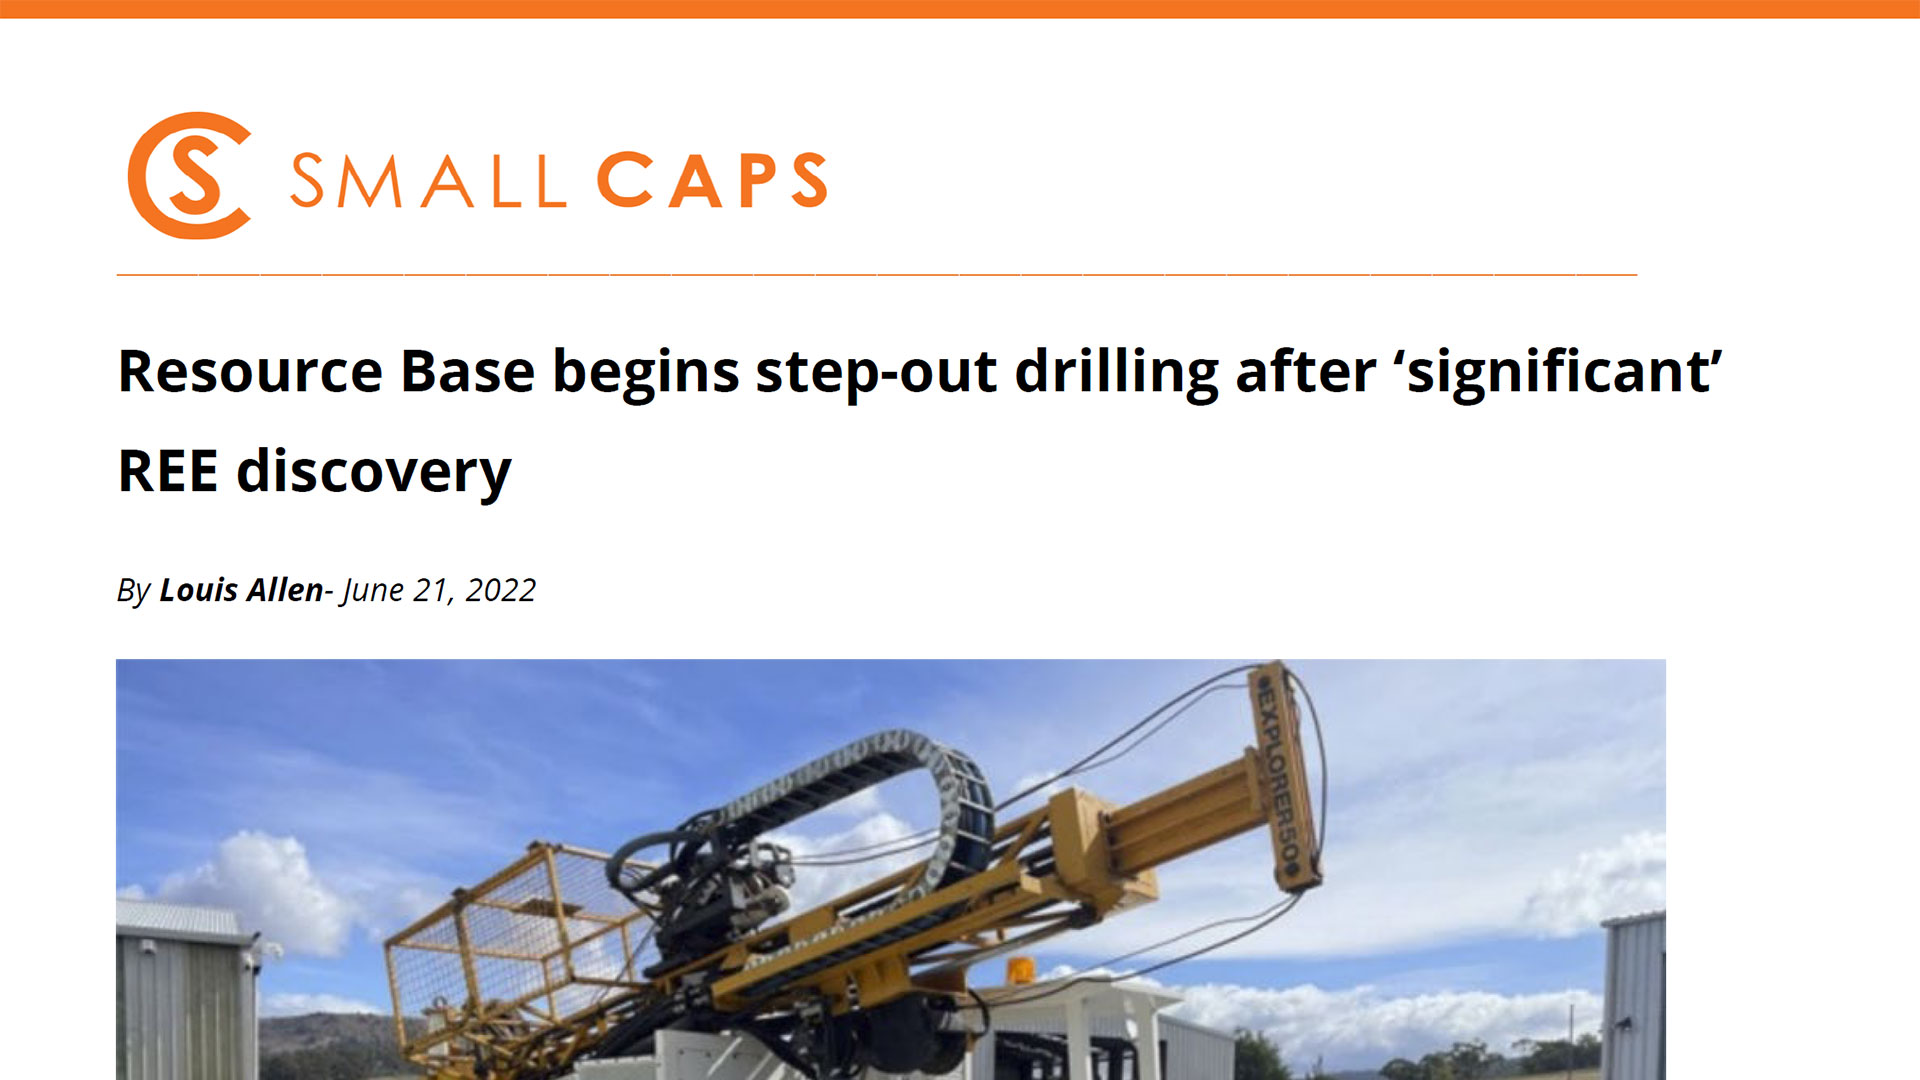 Small Caps: Resource Base begins step-out drilling after ‘significant’ REE discovery